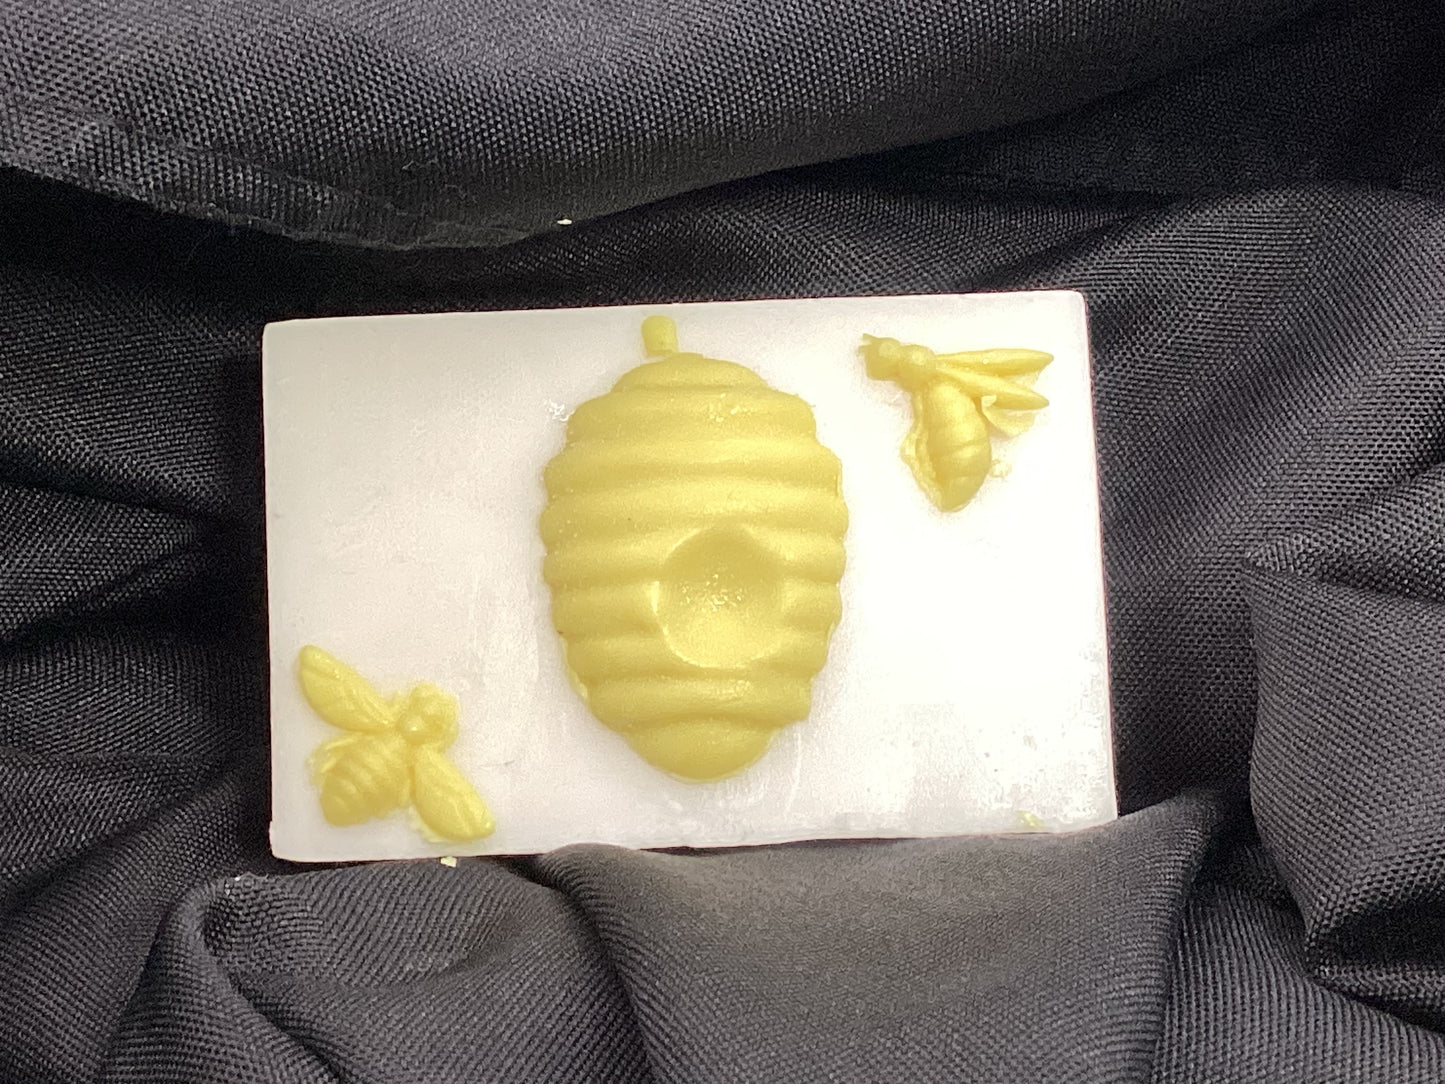  This is a 4 oz bar of Almond and Honey scented Goats Milk and Soap decorated with bees and a hive.

Each item is individually made and may appear different from the photo.